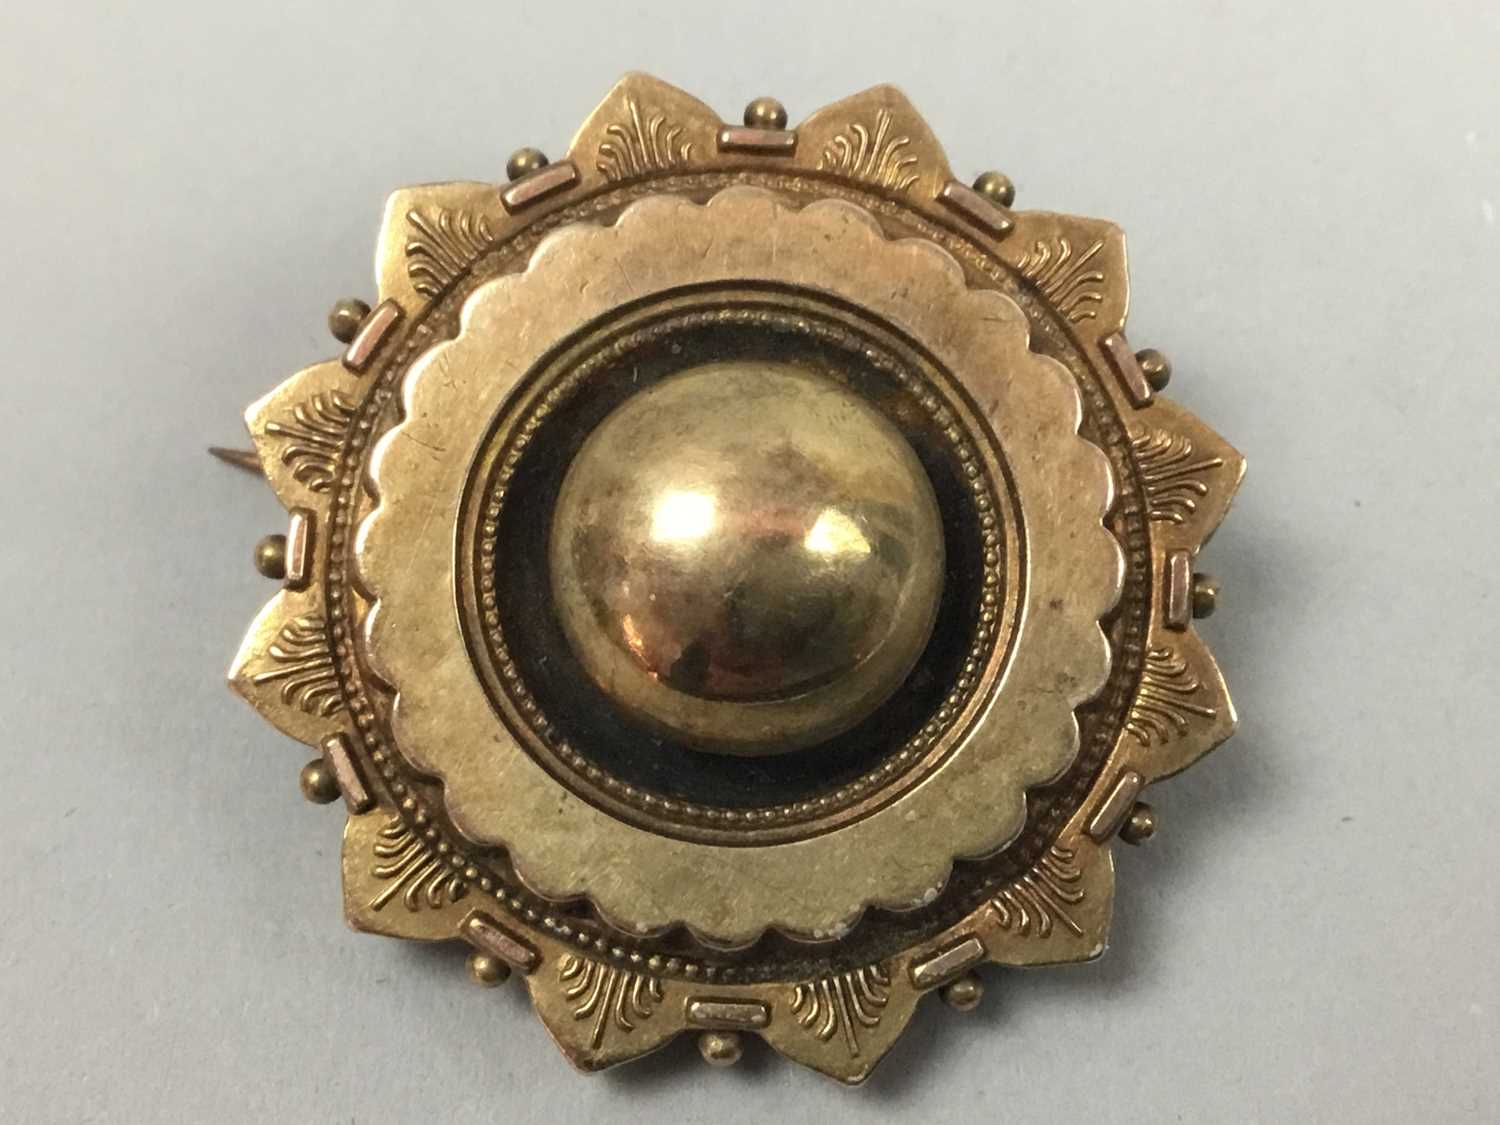 Lot 53 - A VICTORIAN GOLD PLATED MOURNING BROOCH ALONG WITH OTHER JEWELLERY